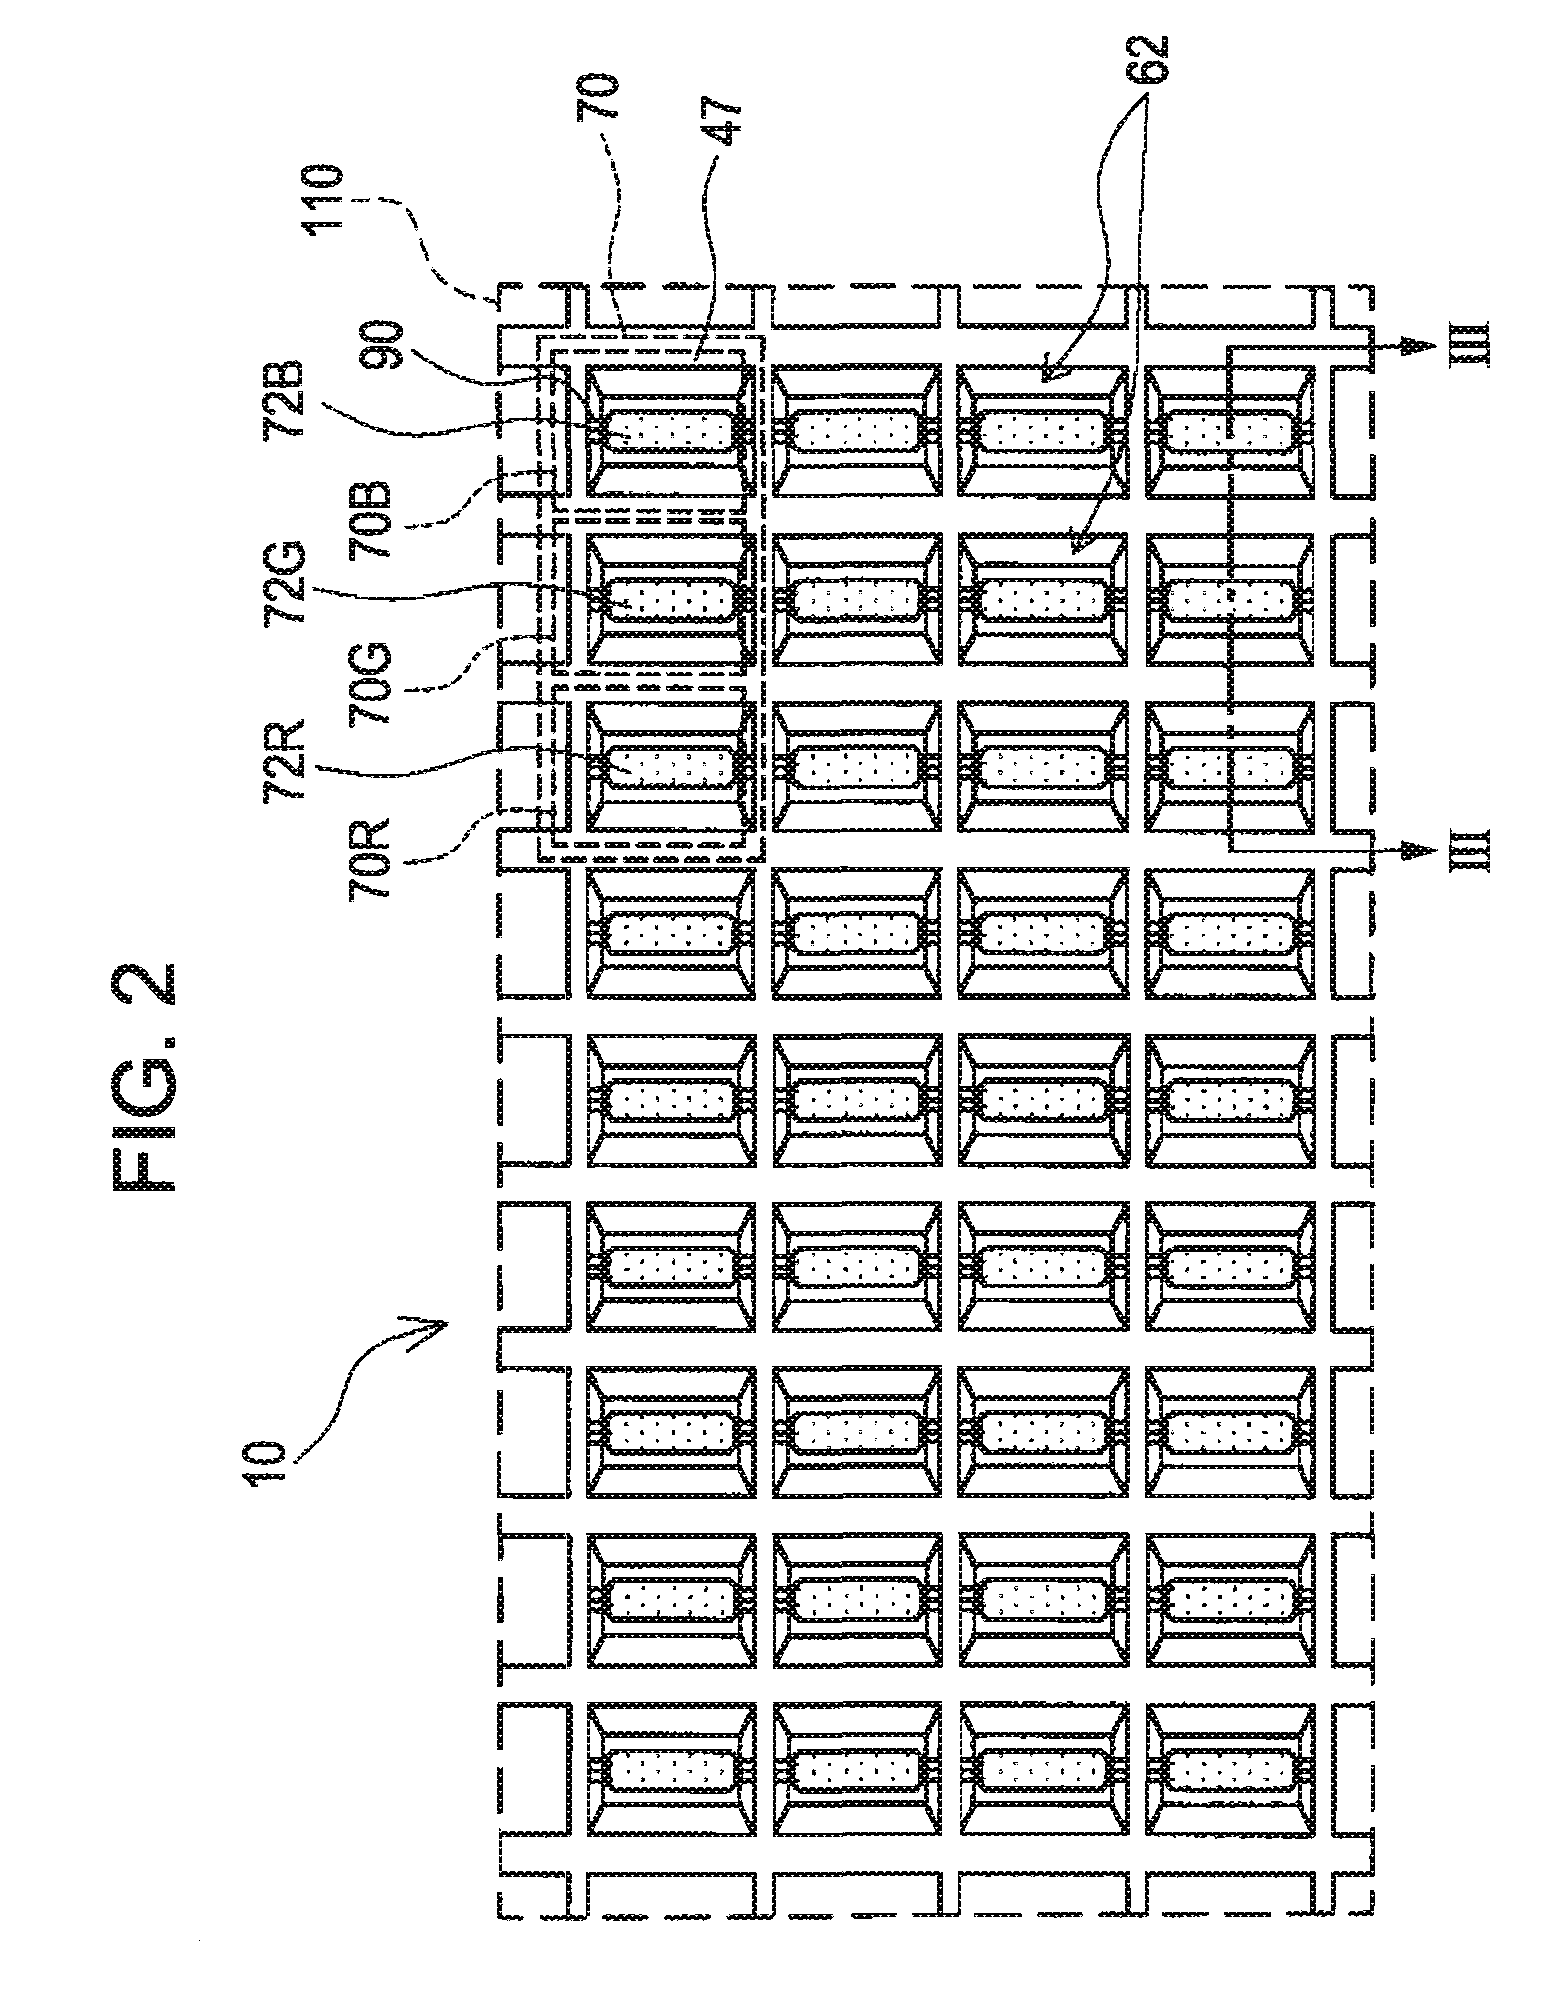 Organic electroluminescent device and optical device